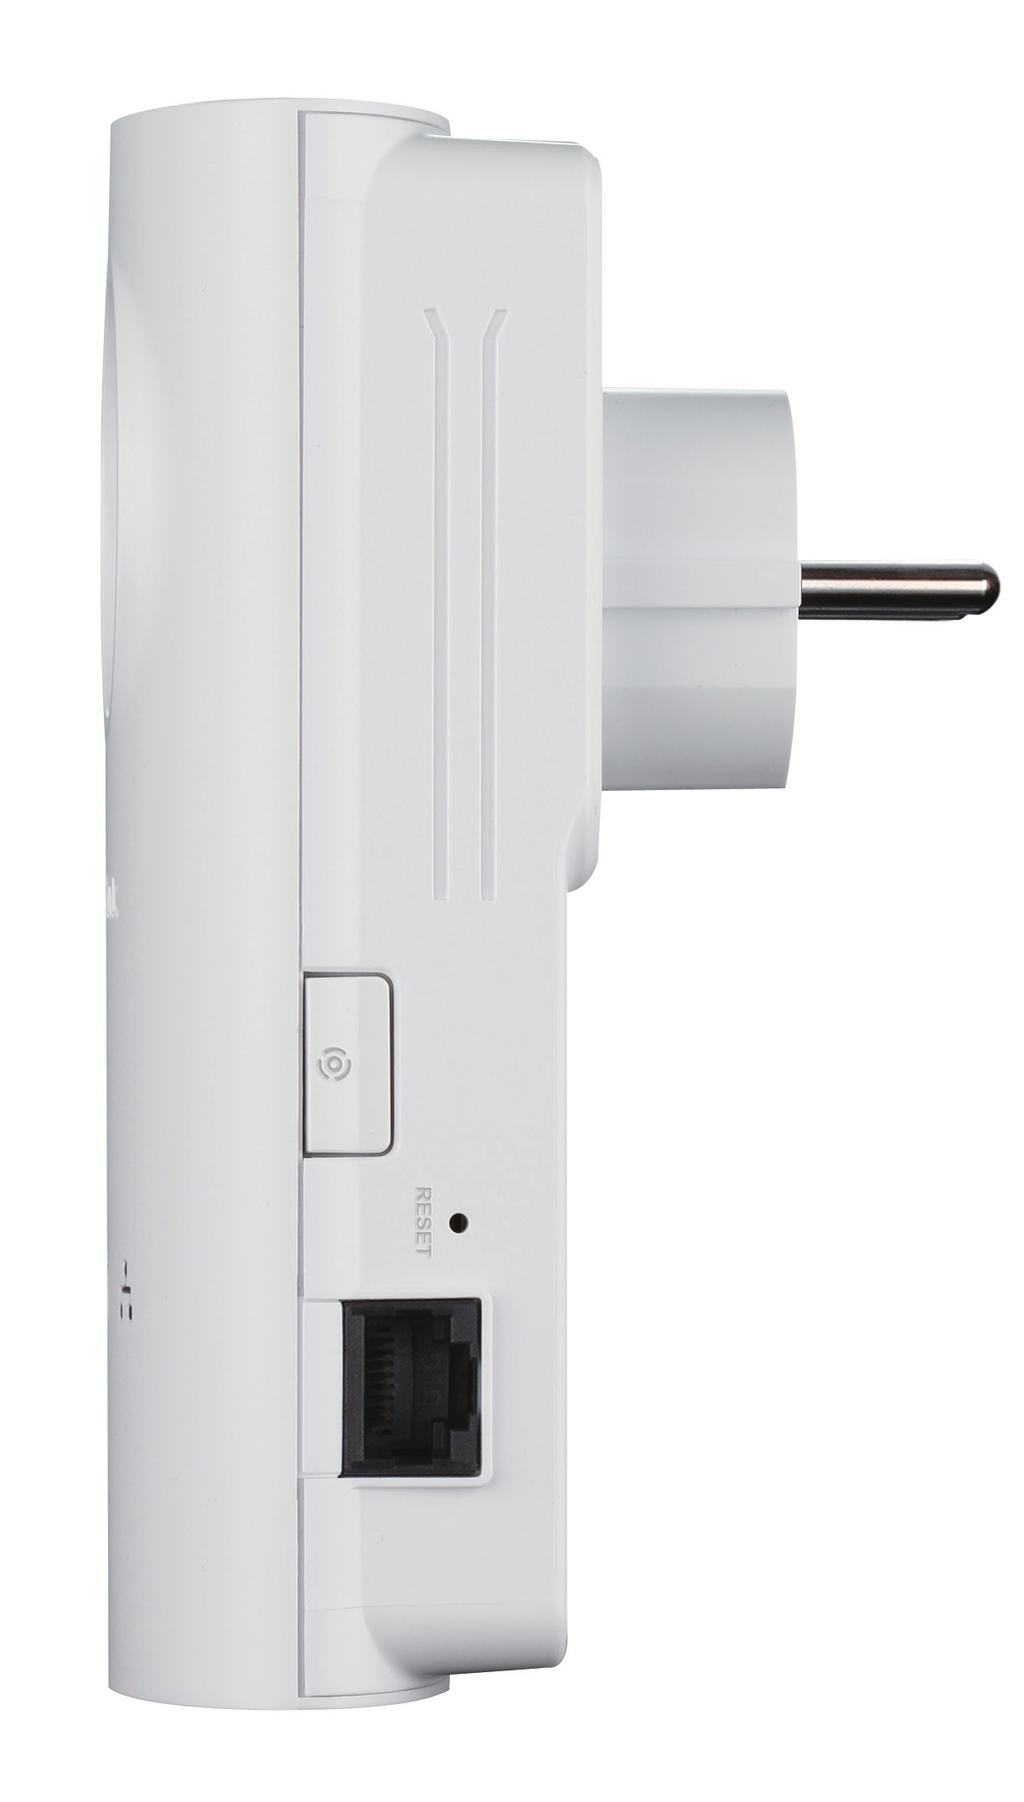 Section 1 - Product Overview Hardware Overview Connection Passthrough Power Socket Rating: 250V/16A maximum